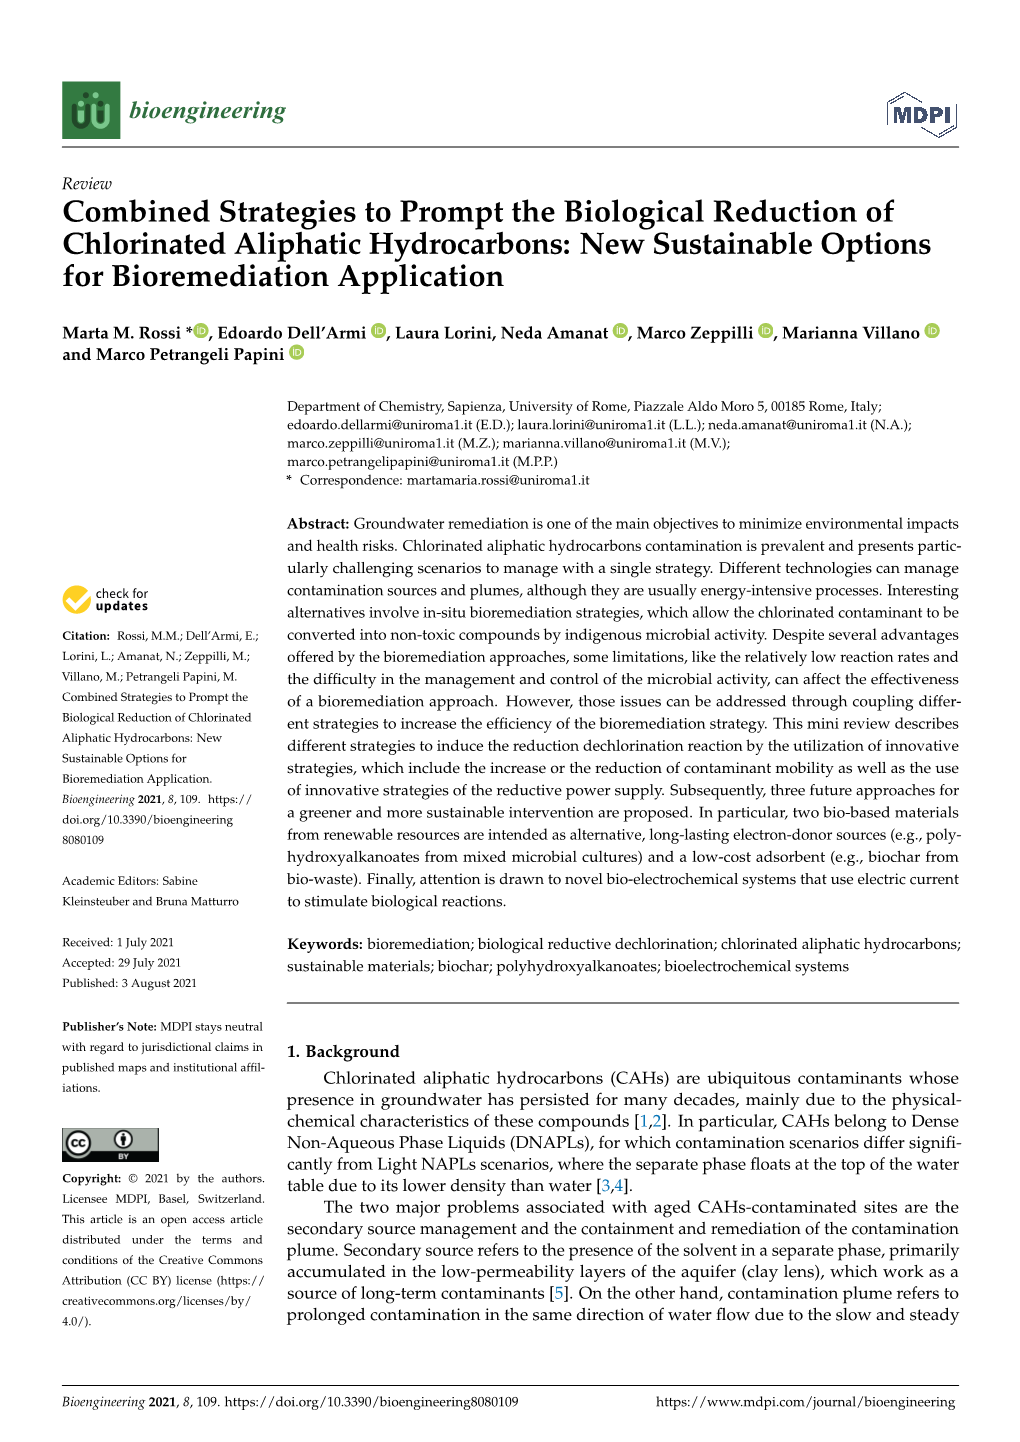 Combined Strategies to Prompt the Biological Reduction of Chlorinated Aliphatic Hydrocarbons: New Sustainable Options for Bioremediation Application